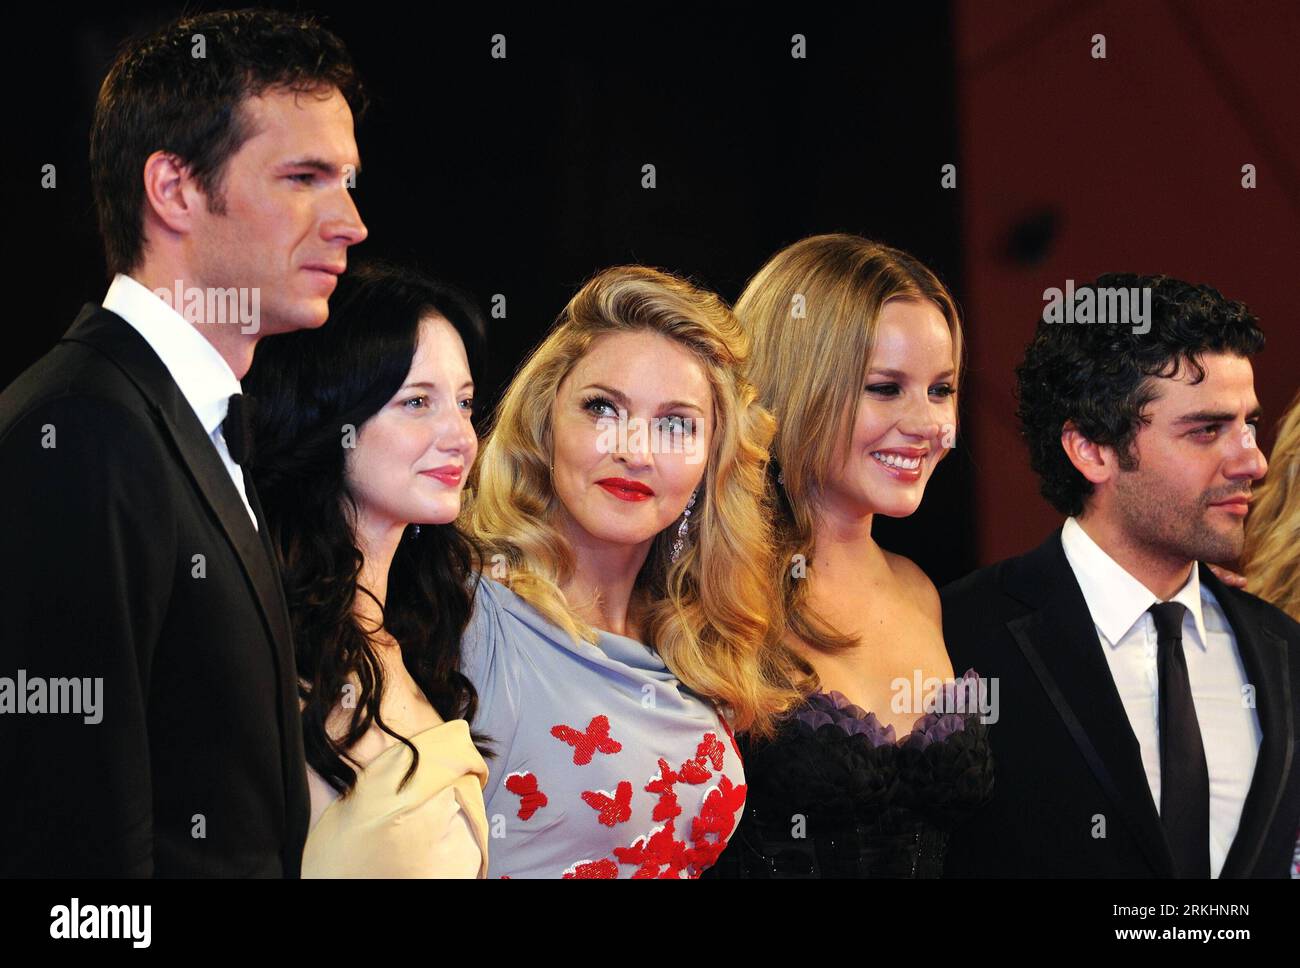 Bildnummer: 55880359  Datum: 01.09.2011  Copyright: imago/Xinhua (110901) -- VENICE, Sept. 1, 2011 (Xinhua) -- U.S. pop star and director Madonna (C) and cast members pose on the red carpet before the premiere of her new film W.E. at the 68th Venice International Film Festival in Venice, Italy, Sept. 1, 2011. (Xinhua/Wang Qingqin) ITALY-VENICE-FILM FESTIVAL-MADONNA PUBLICATIONxNOTxINxCHN People Film Entertainment Kultur 68 Filmfestspiele Venedig Filmpremiere x0x xtm premiumd 2011 quer WE Musik     55880359 Date 01 09 2011 Copyright Imago XINHUA  Venice Sept 1 2011 XINHUA U S Pop Star and Direc Stock Photo